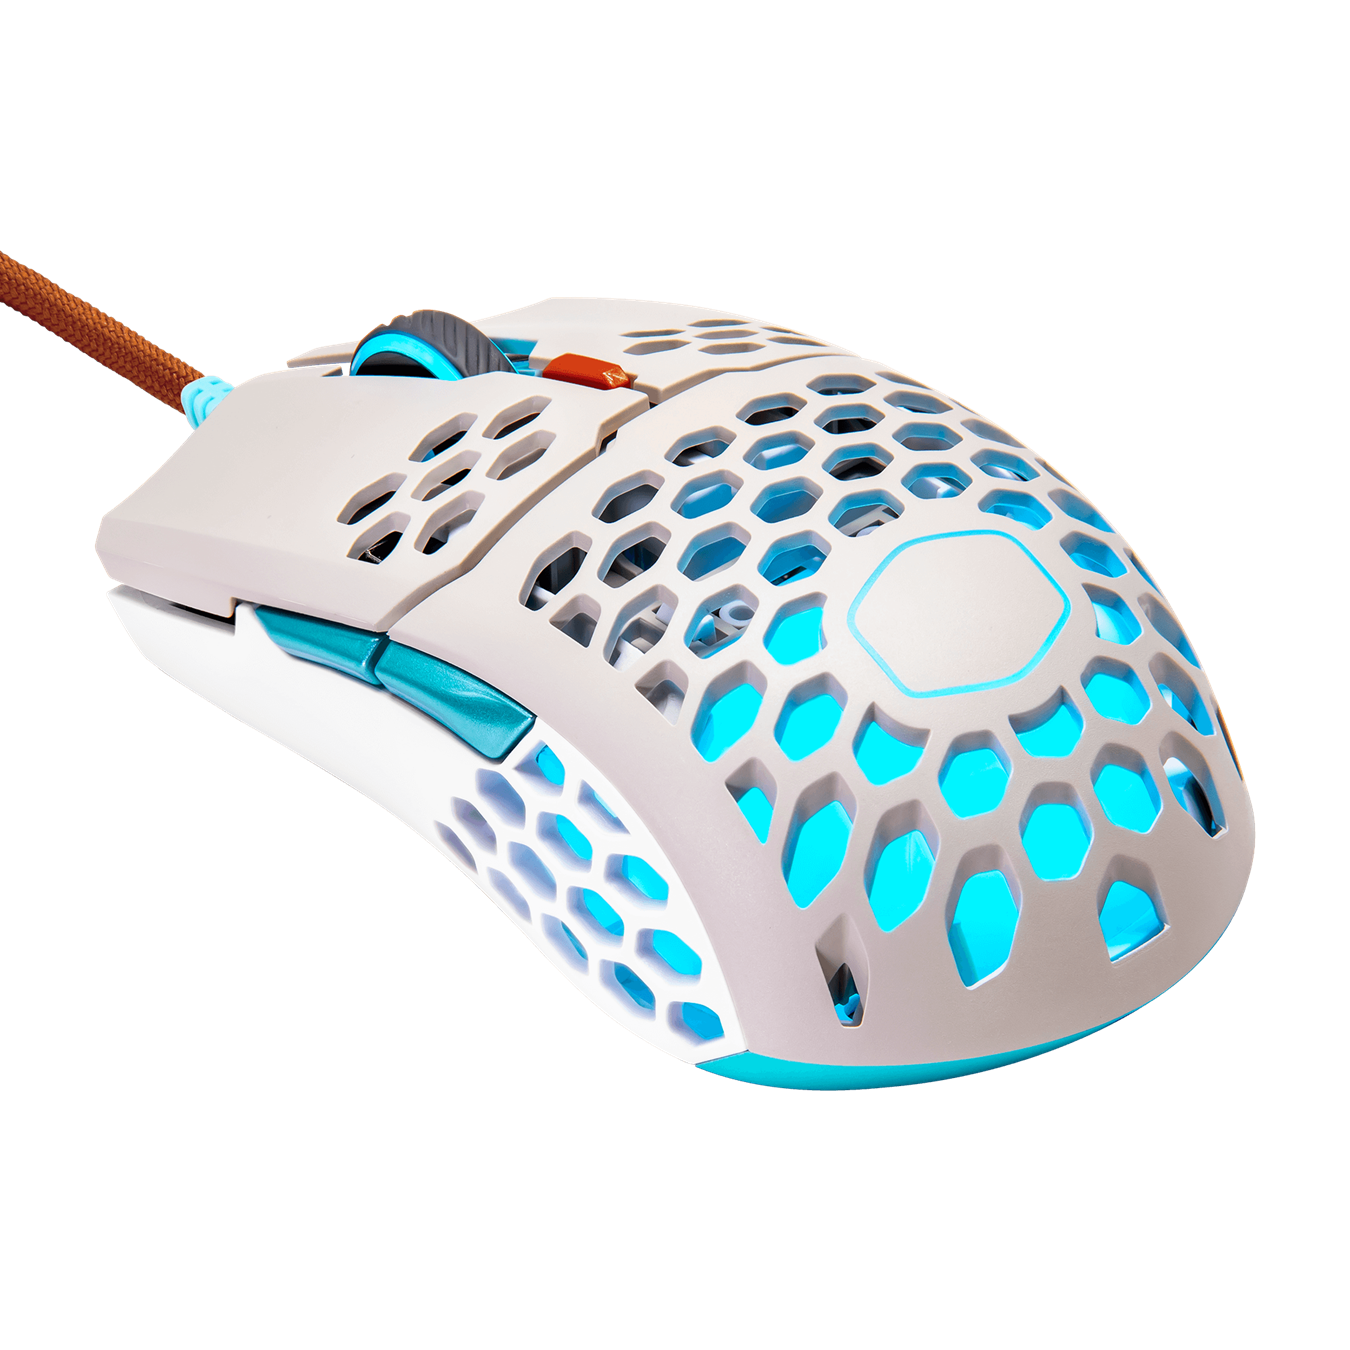 MM711 Retro RGB Gaming Mouse - New perforated housing is engineered to be supremely durable and lightweight, meaning you can play longer without fatigue. The elegant metallic color will also impress you.